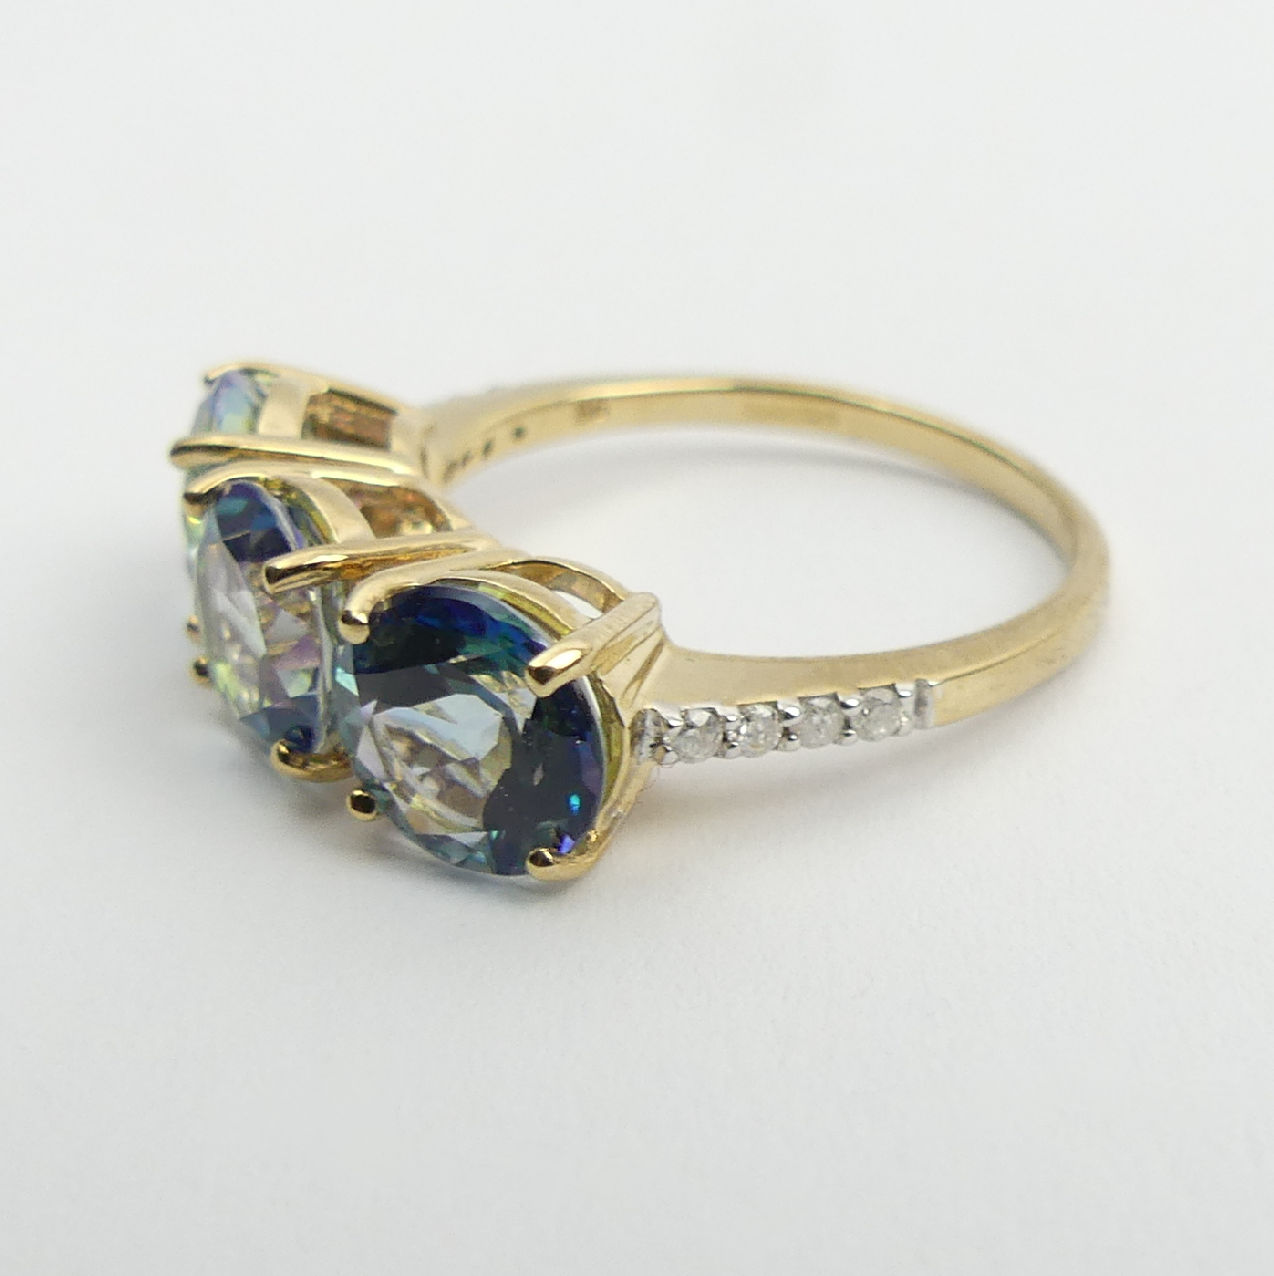 9ct gold mystic topaz and diamond ring, 3.2 grams, 7mm, size N. UK Postage £12. - Image 3 of 7